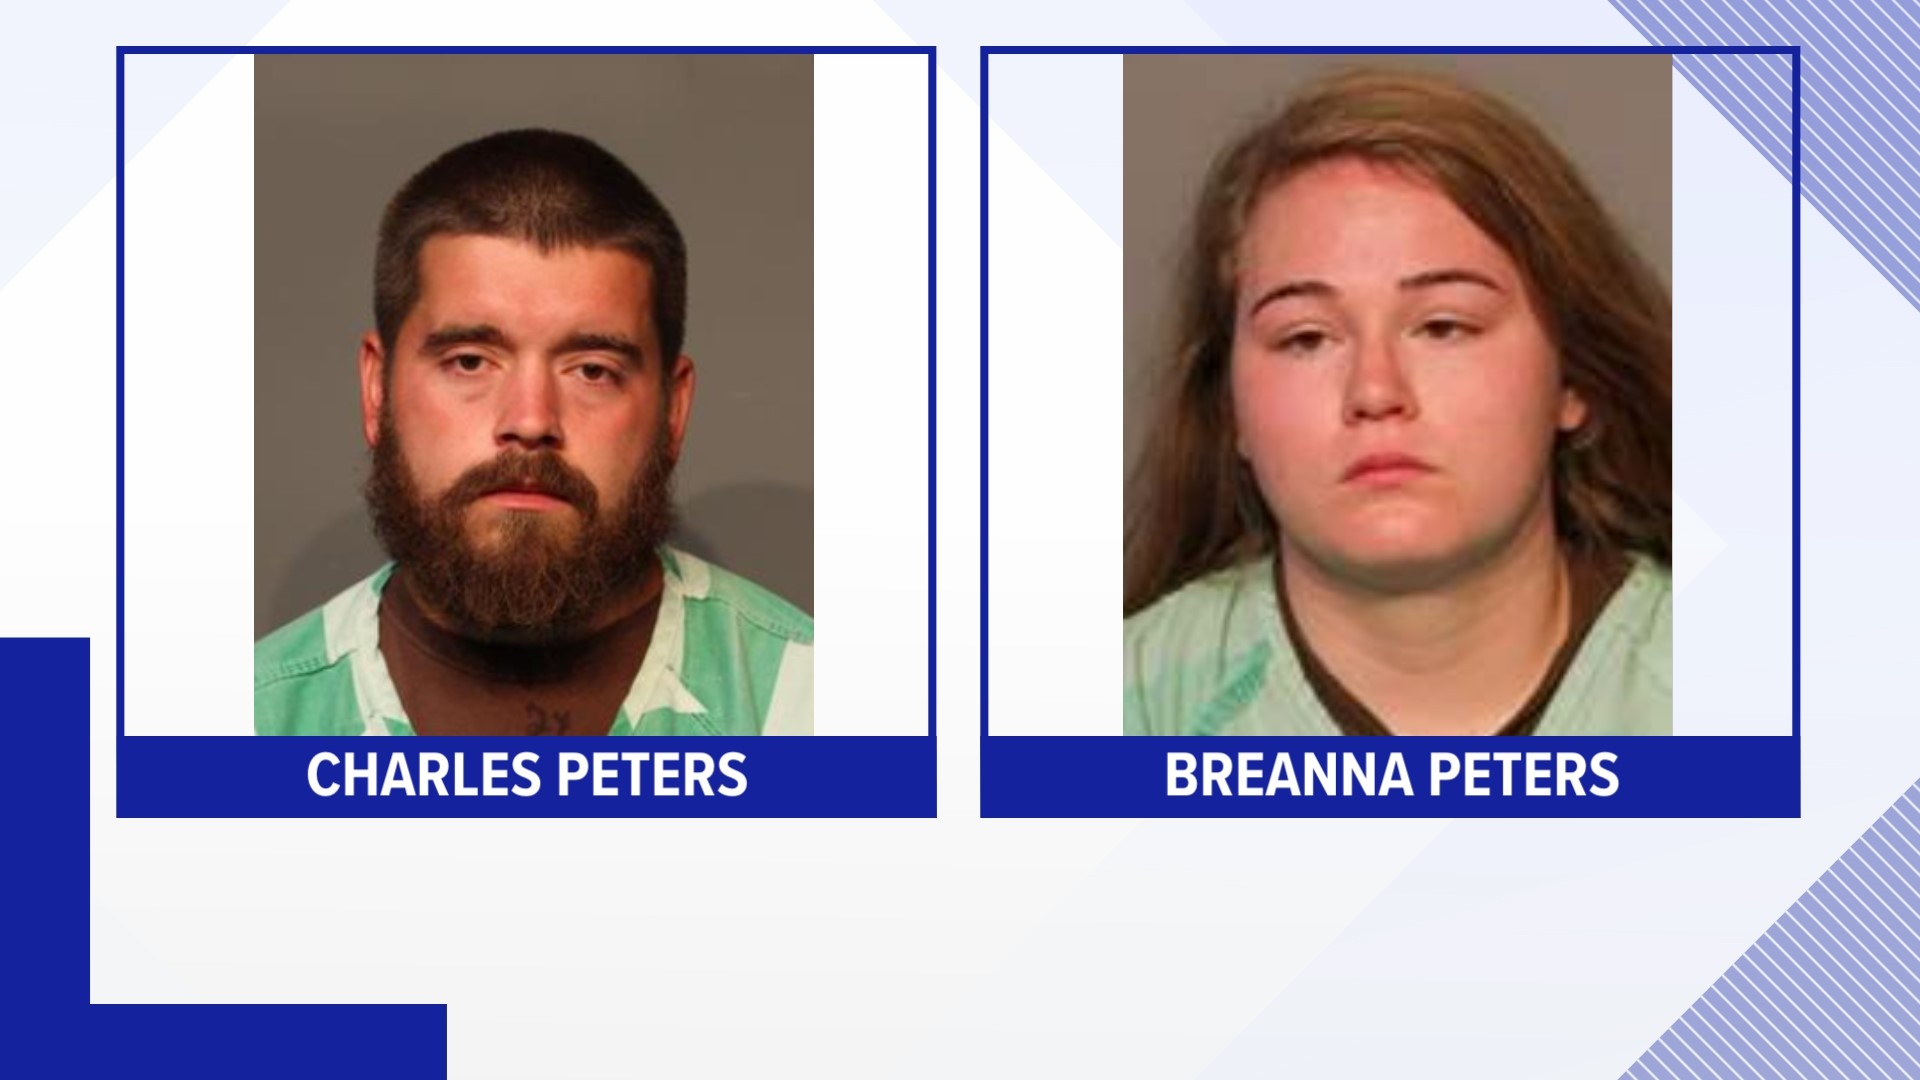 Ankeny police say a mother and father have both been charged in causing their infant child's death in March 2022.